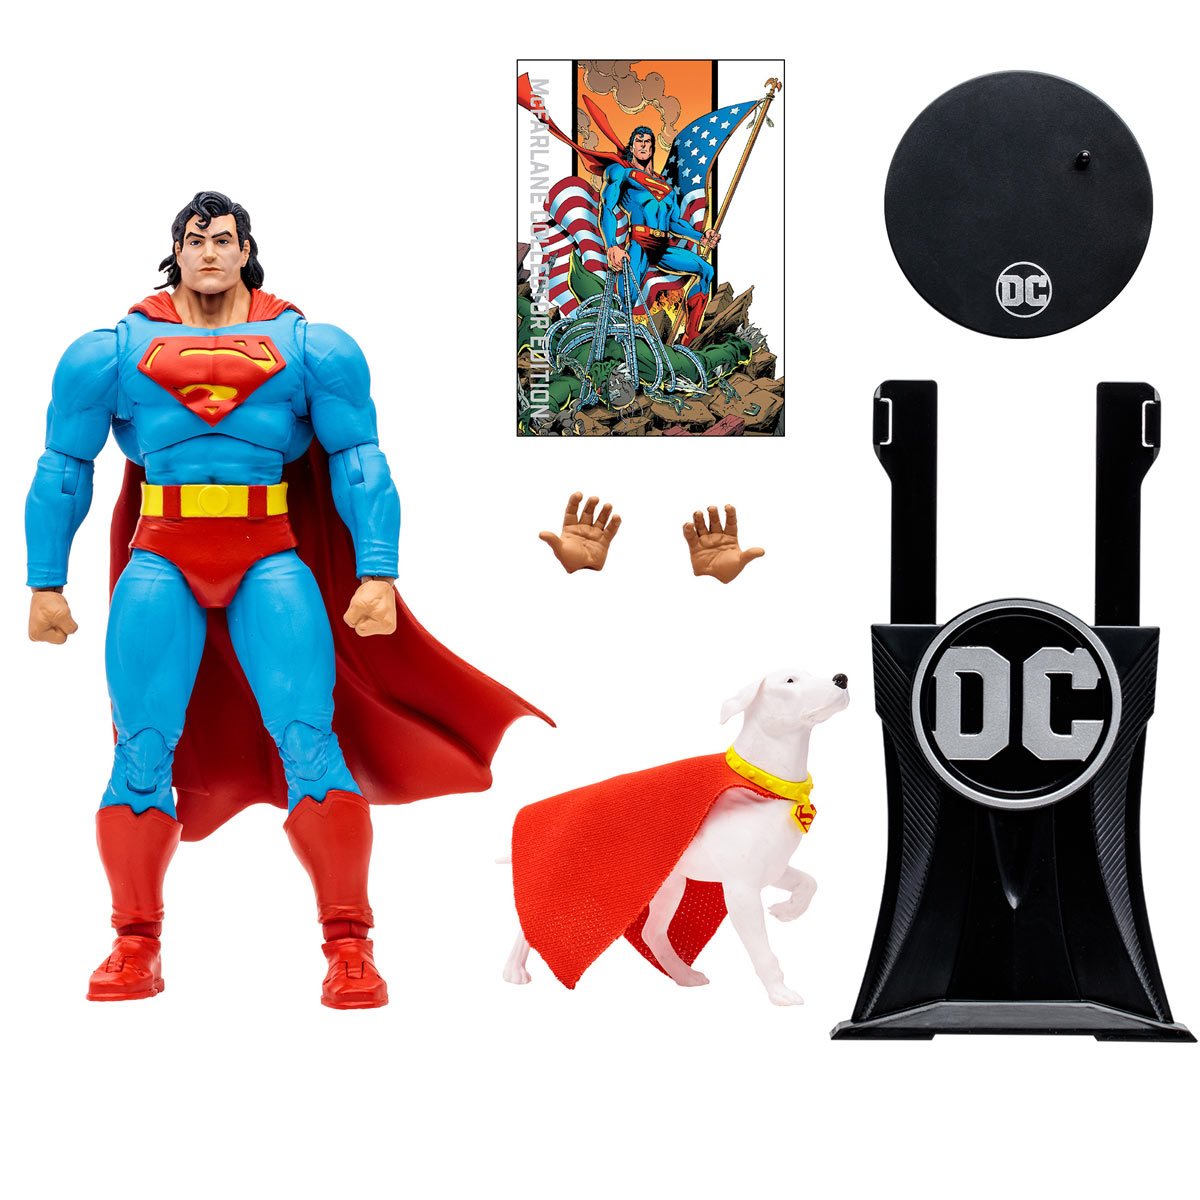 DC McFarlane Collector Edition Wave 3 Superman and Krypto Return of Superman